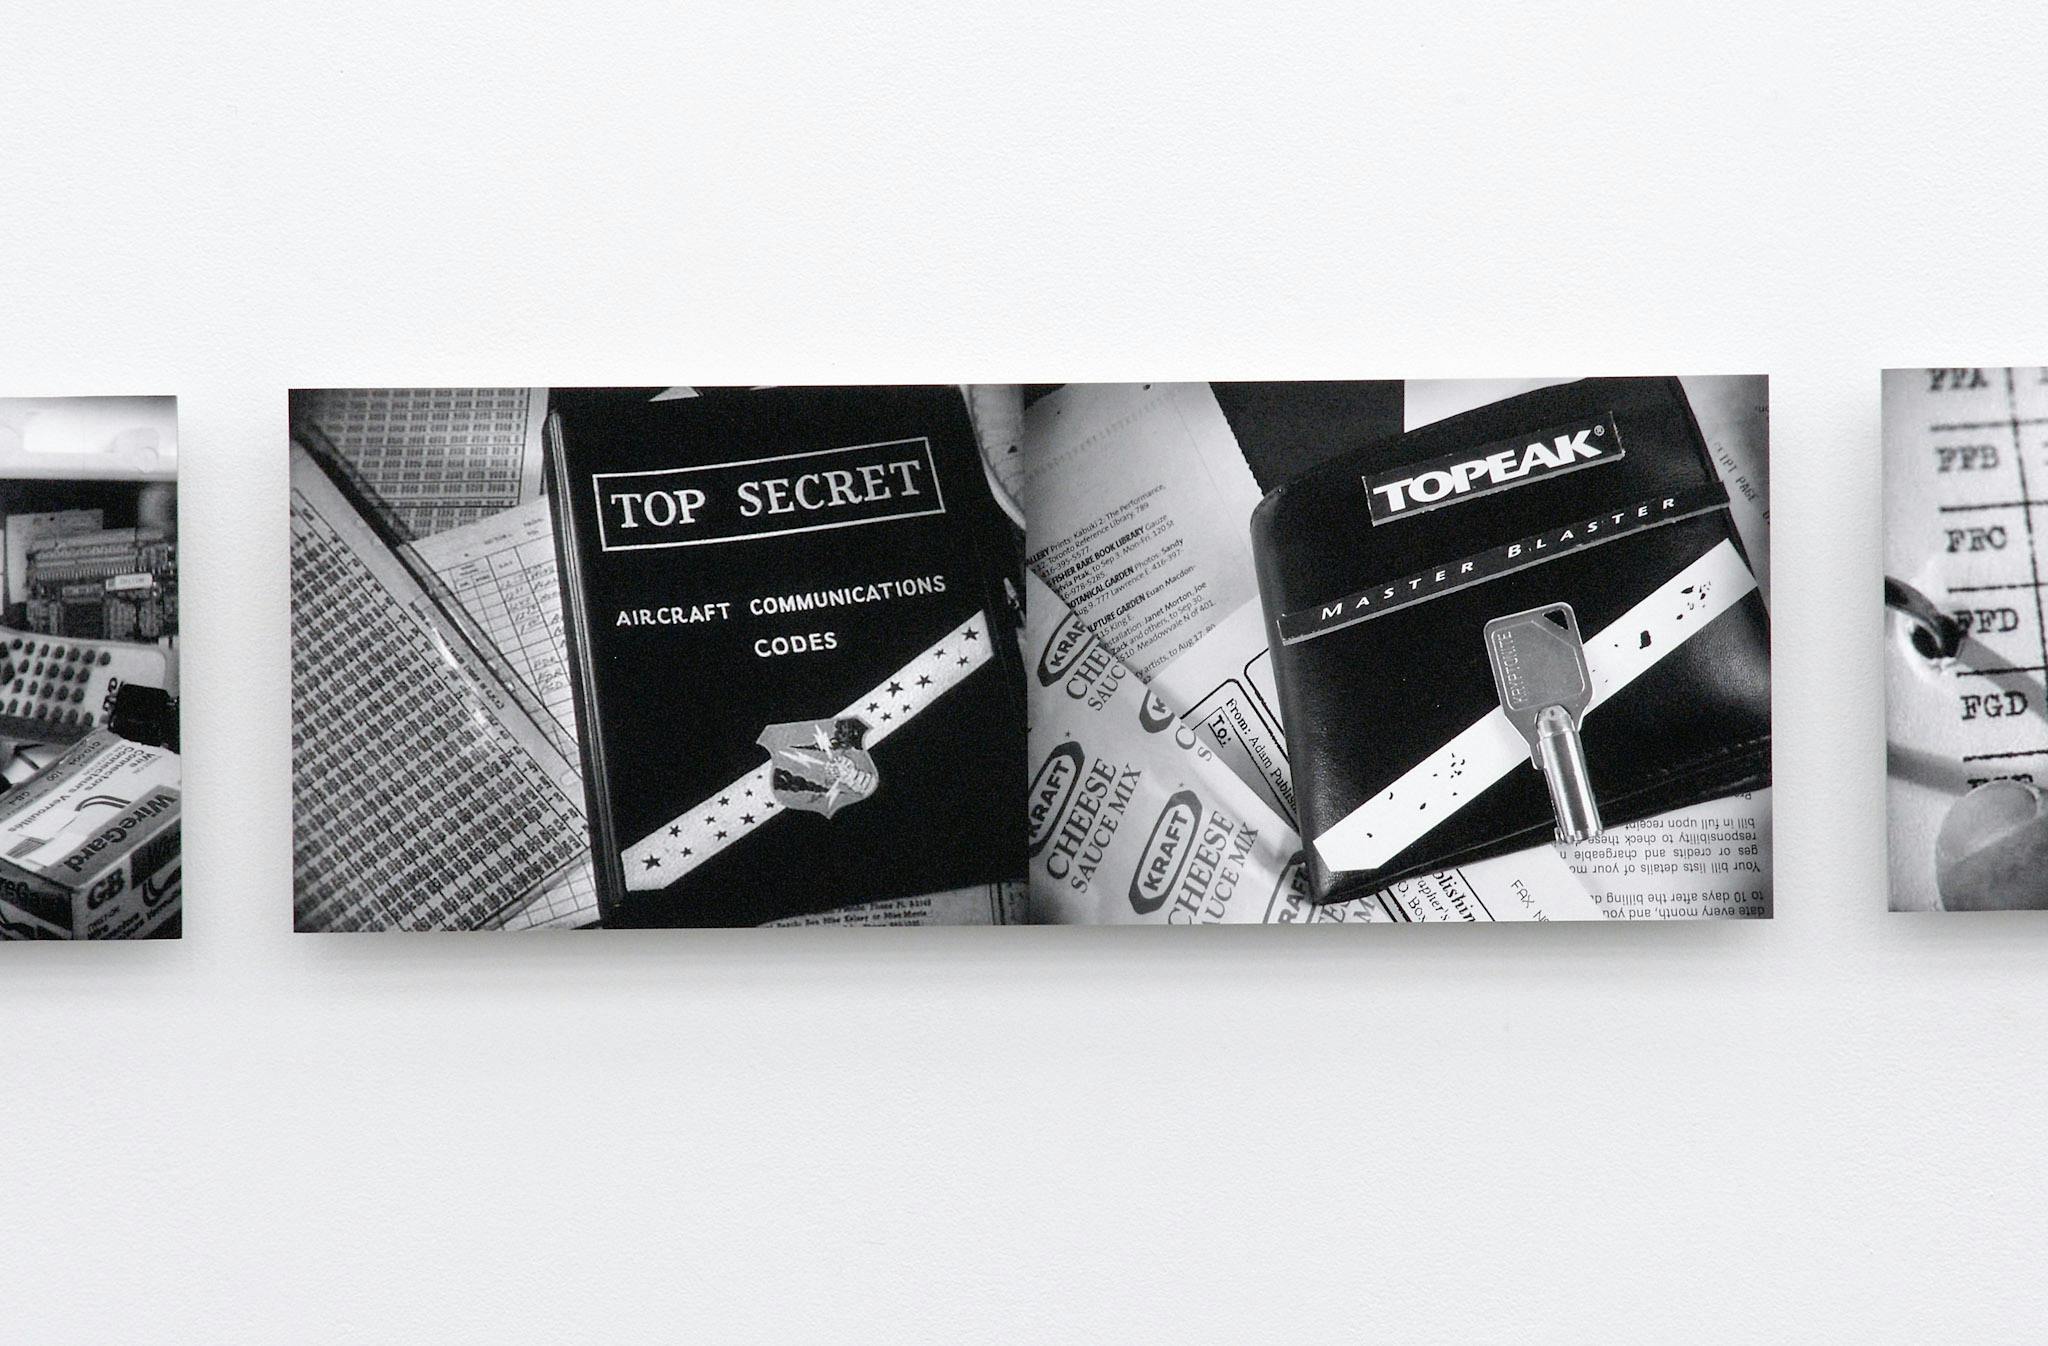 A pair of black and white photographs are installed on a gallery wall. The image on the left shows a book titled TOP SECRET. The next image mimics the left image with everyday objects.